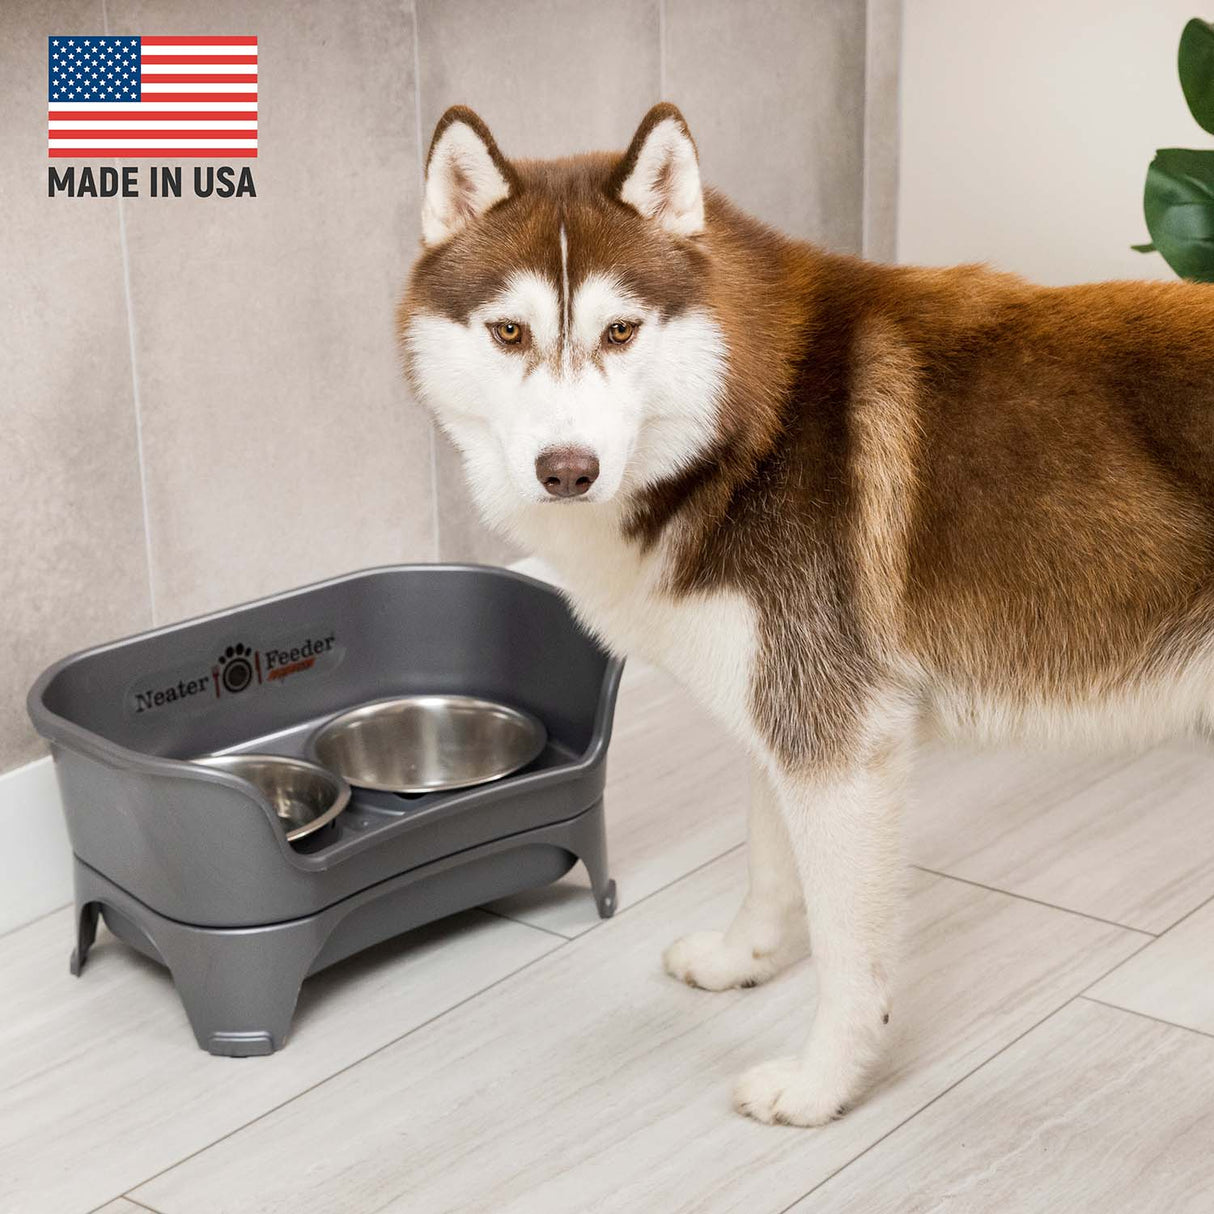 Husky with a Gunmetal Express that is Made in the USA